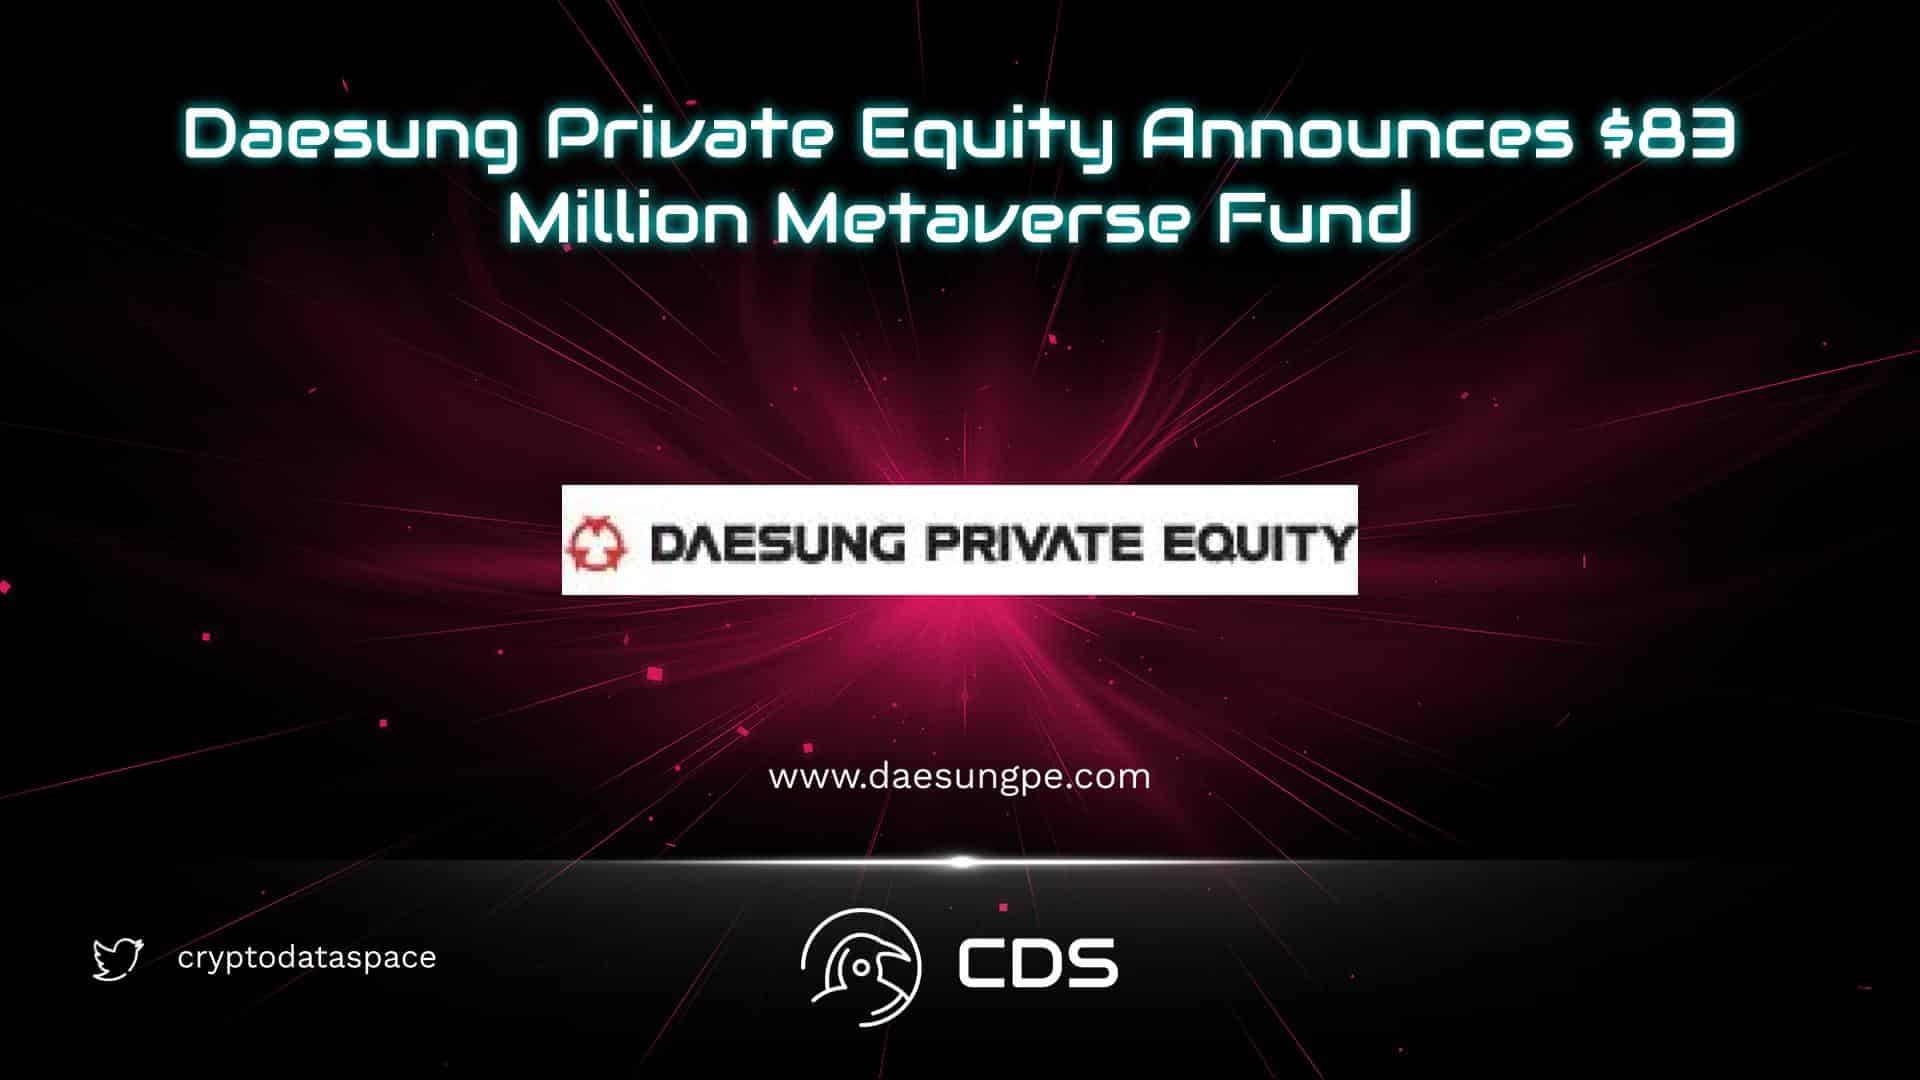 Daesung Private Equity Announces $83 Million Metaverse Fund